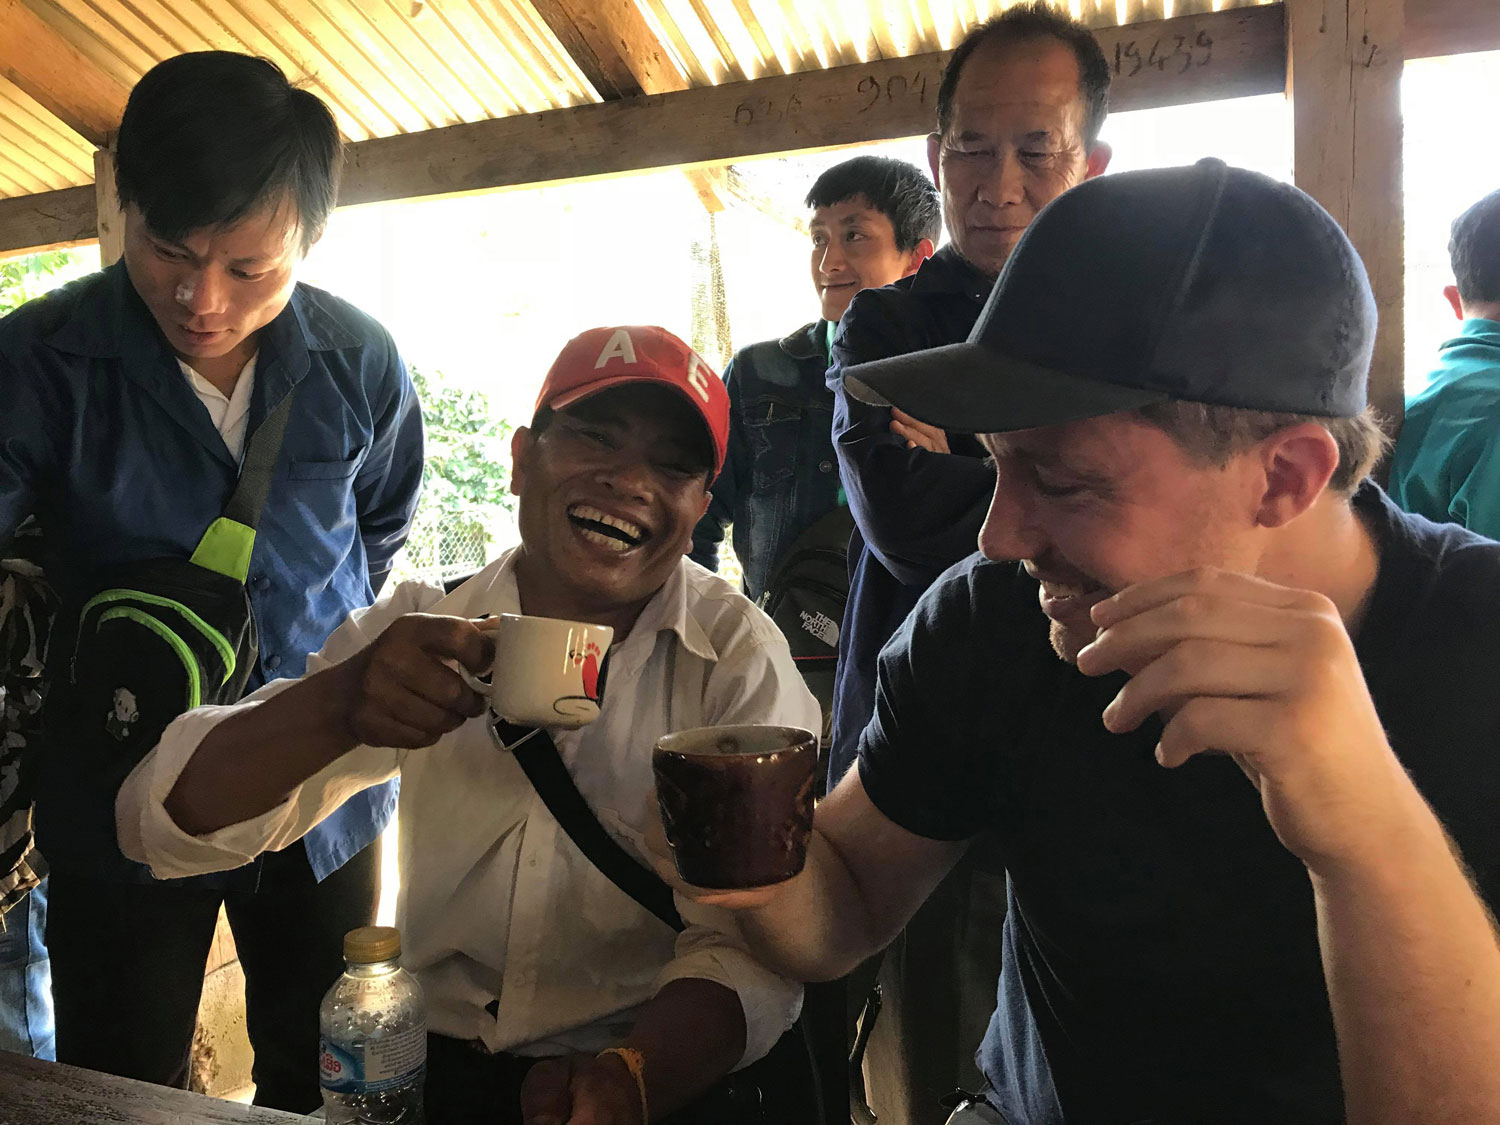 In 2020, the Vanmai farmers could taste their own coffee for the first time